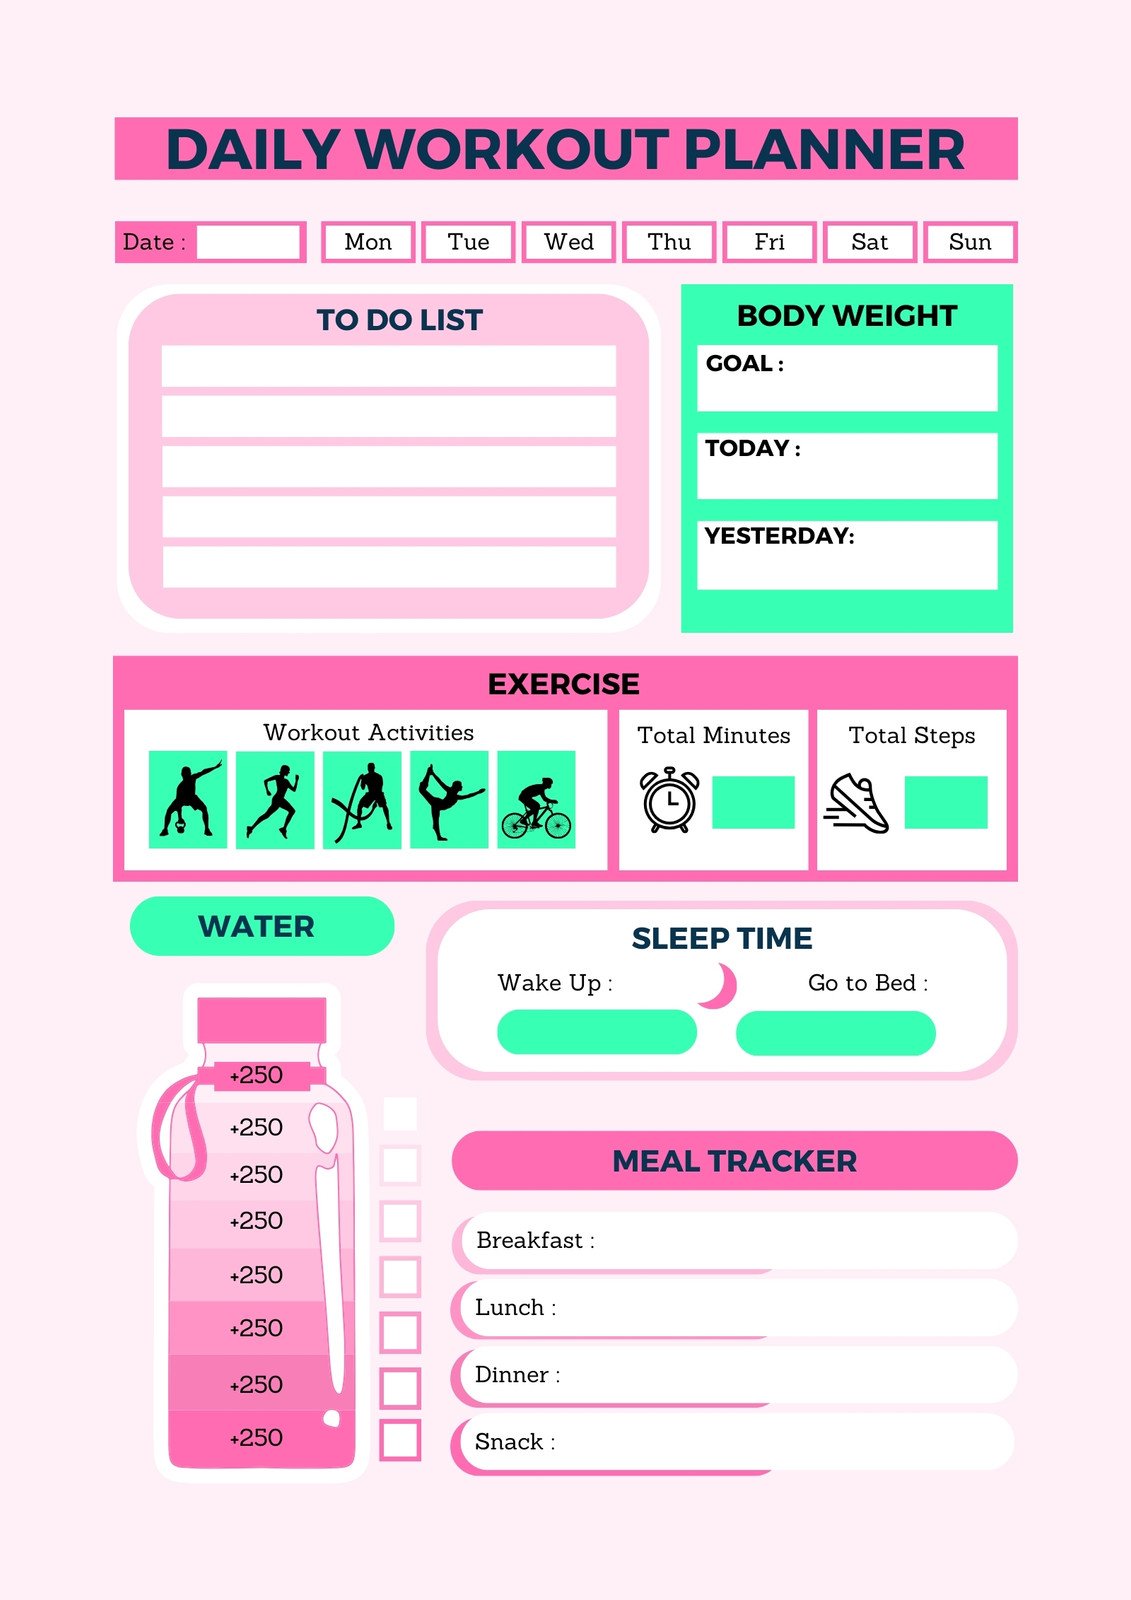 Download Get Fit with this Fun and Cute Workout Routine Wallpaper